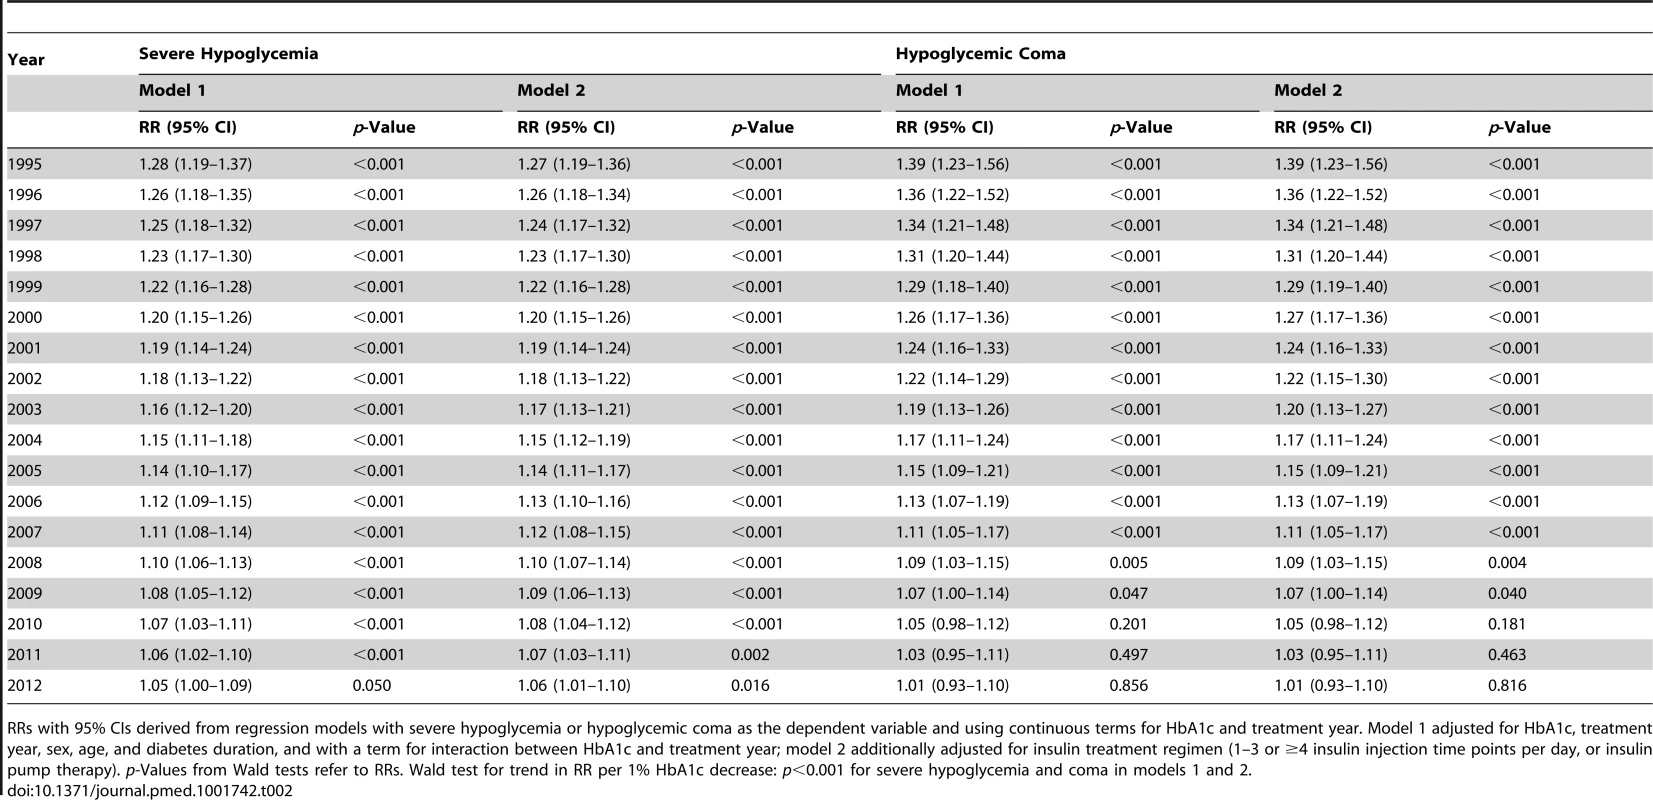 HbA1c as predictor of severe hypoglycemia and hypoglycemic coma per year, expressed as relative risk per 1% HbA1c decrease.